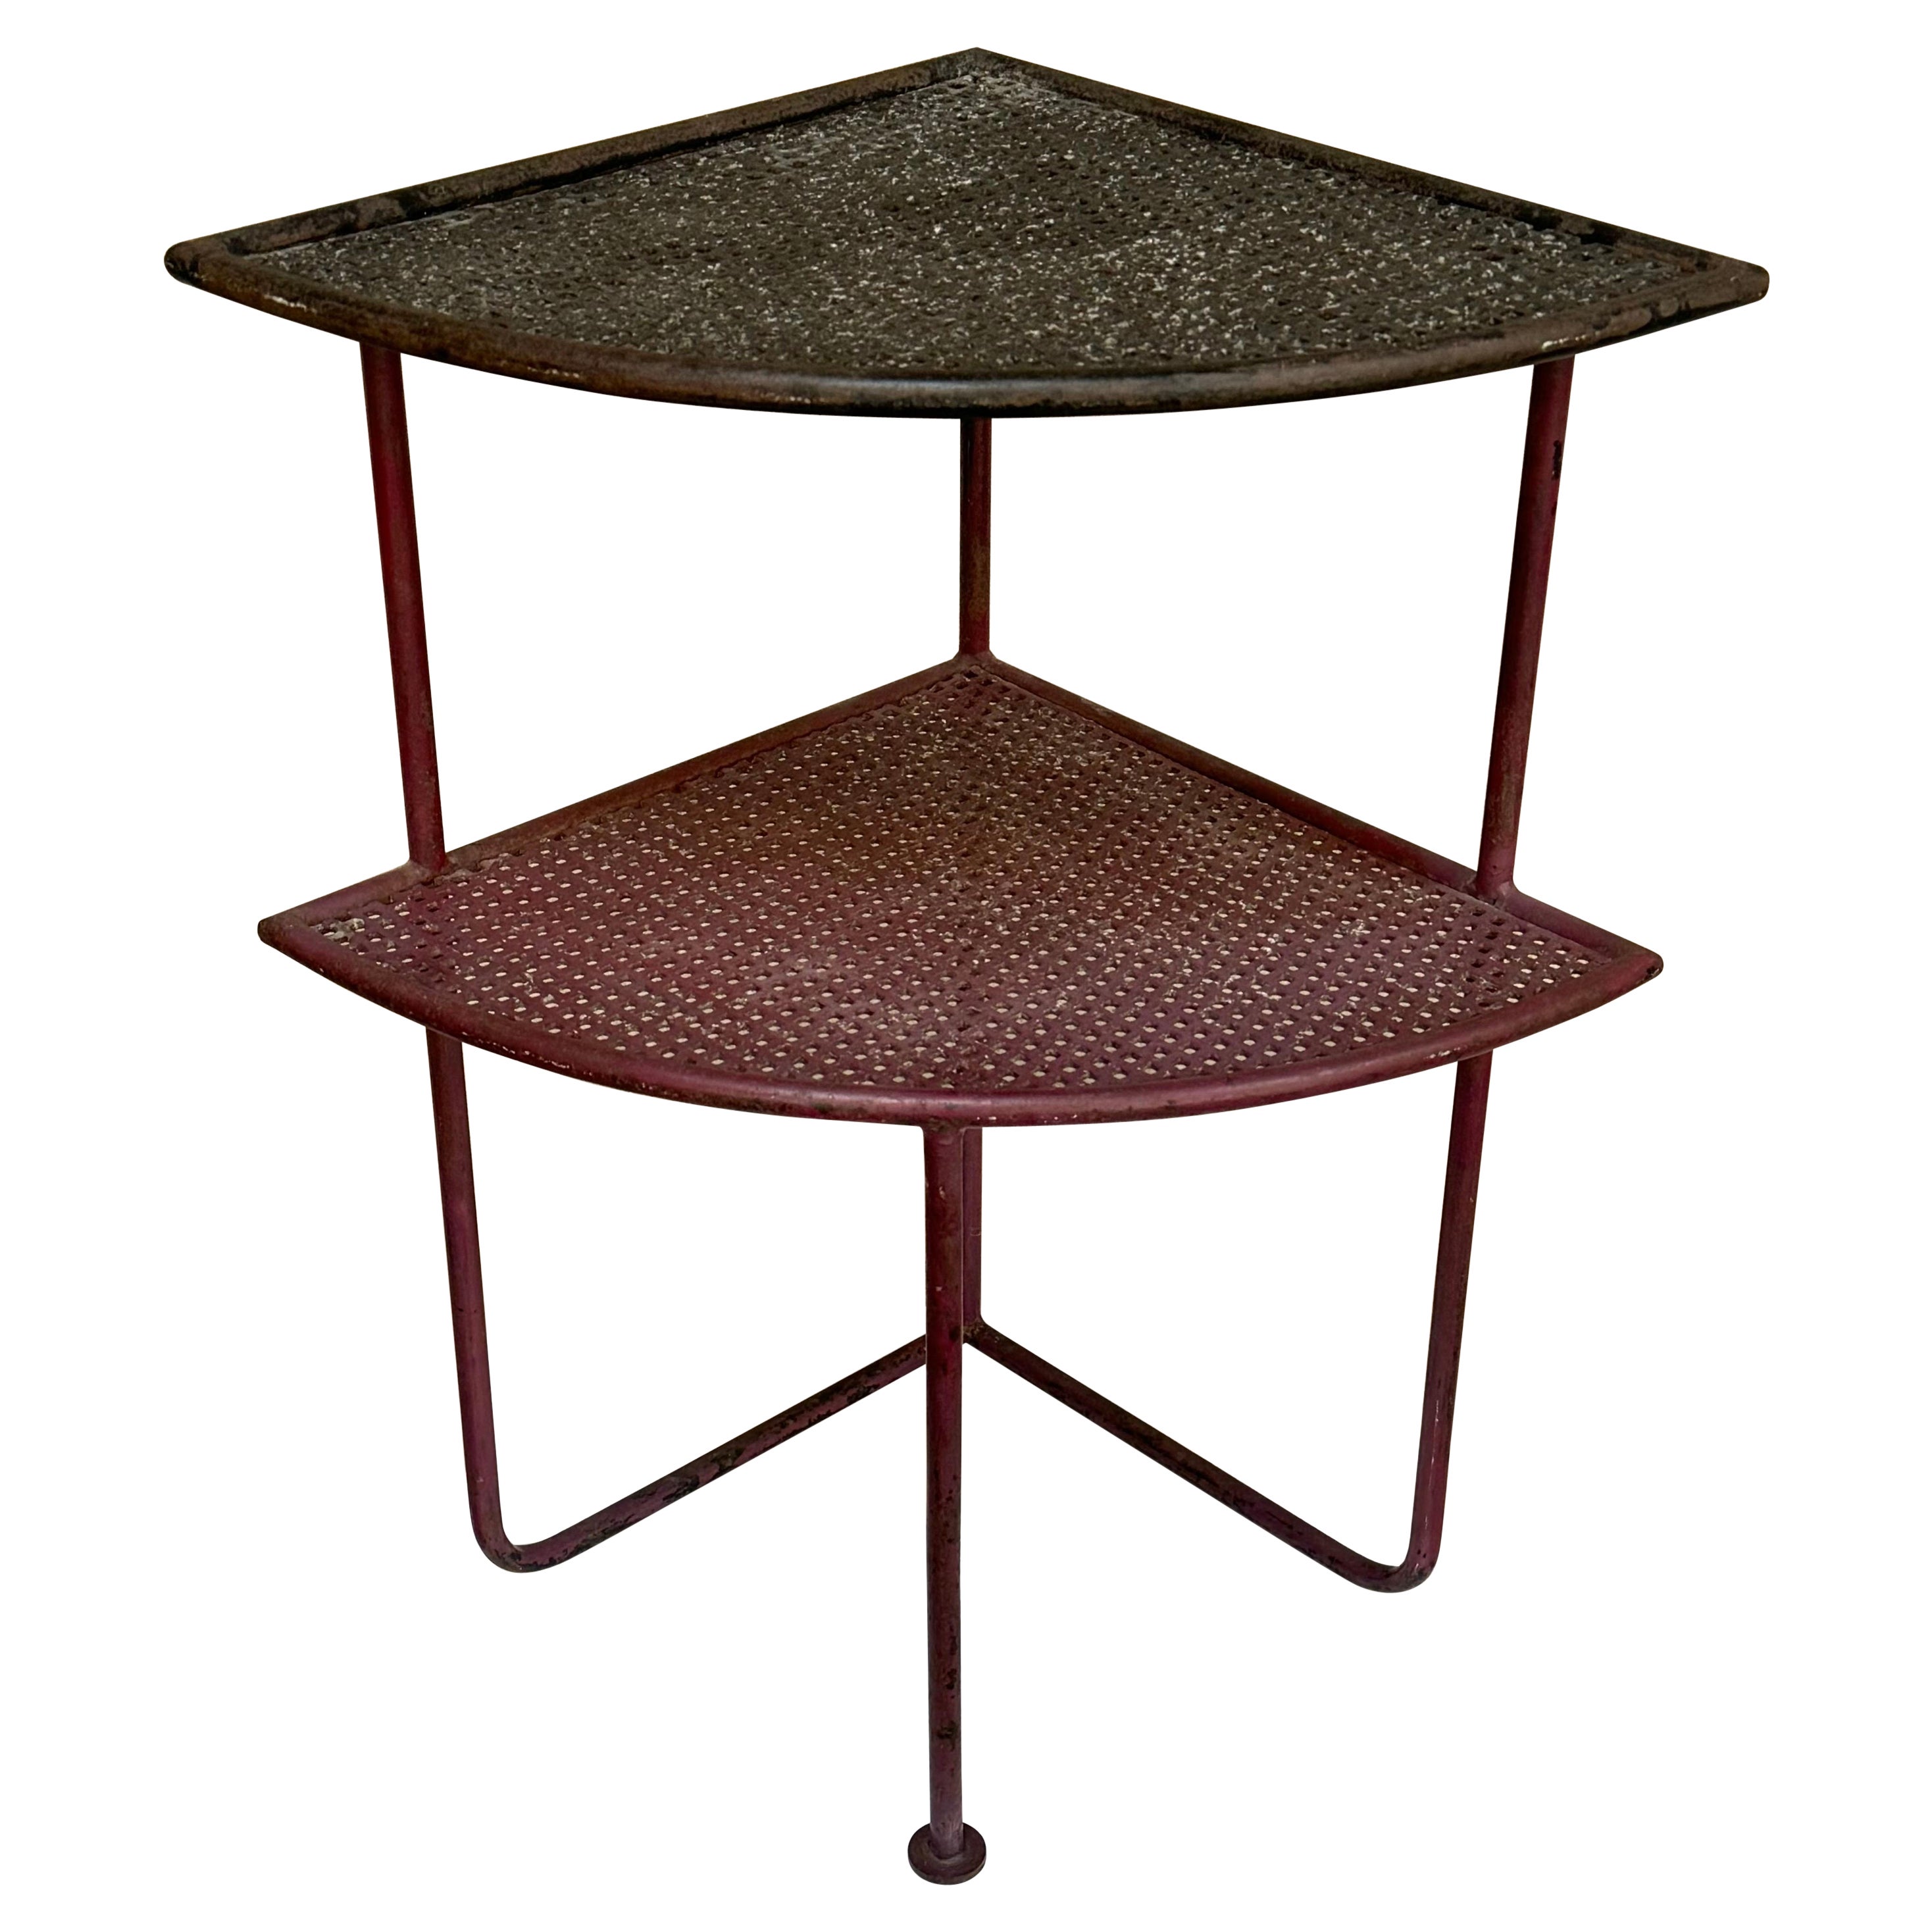 1950s Modernist French Iron with Perforated Metal Shelves Side Table For Sale